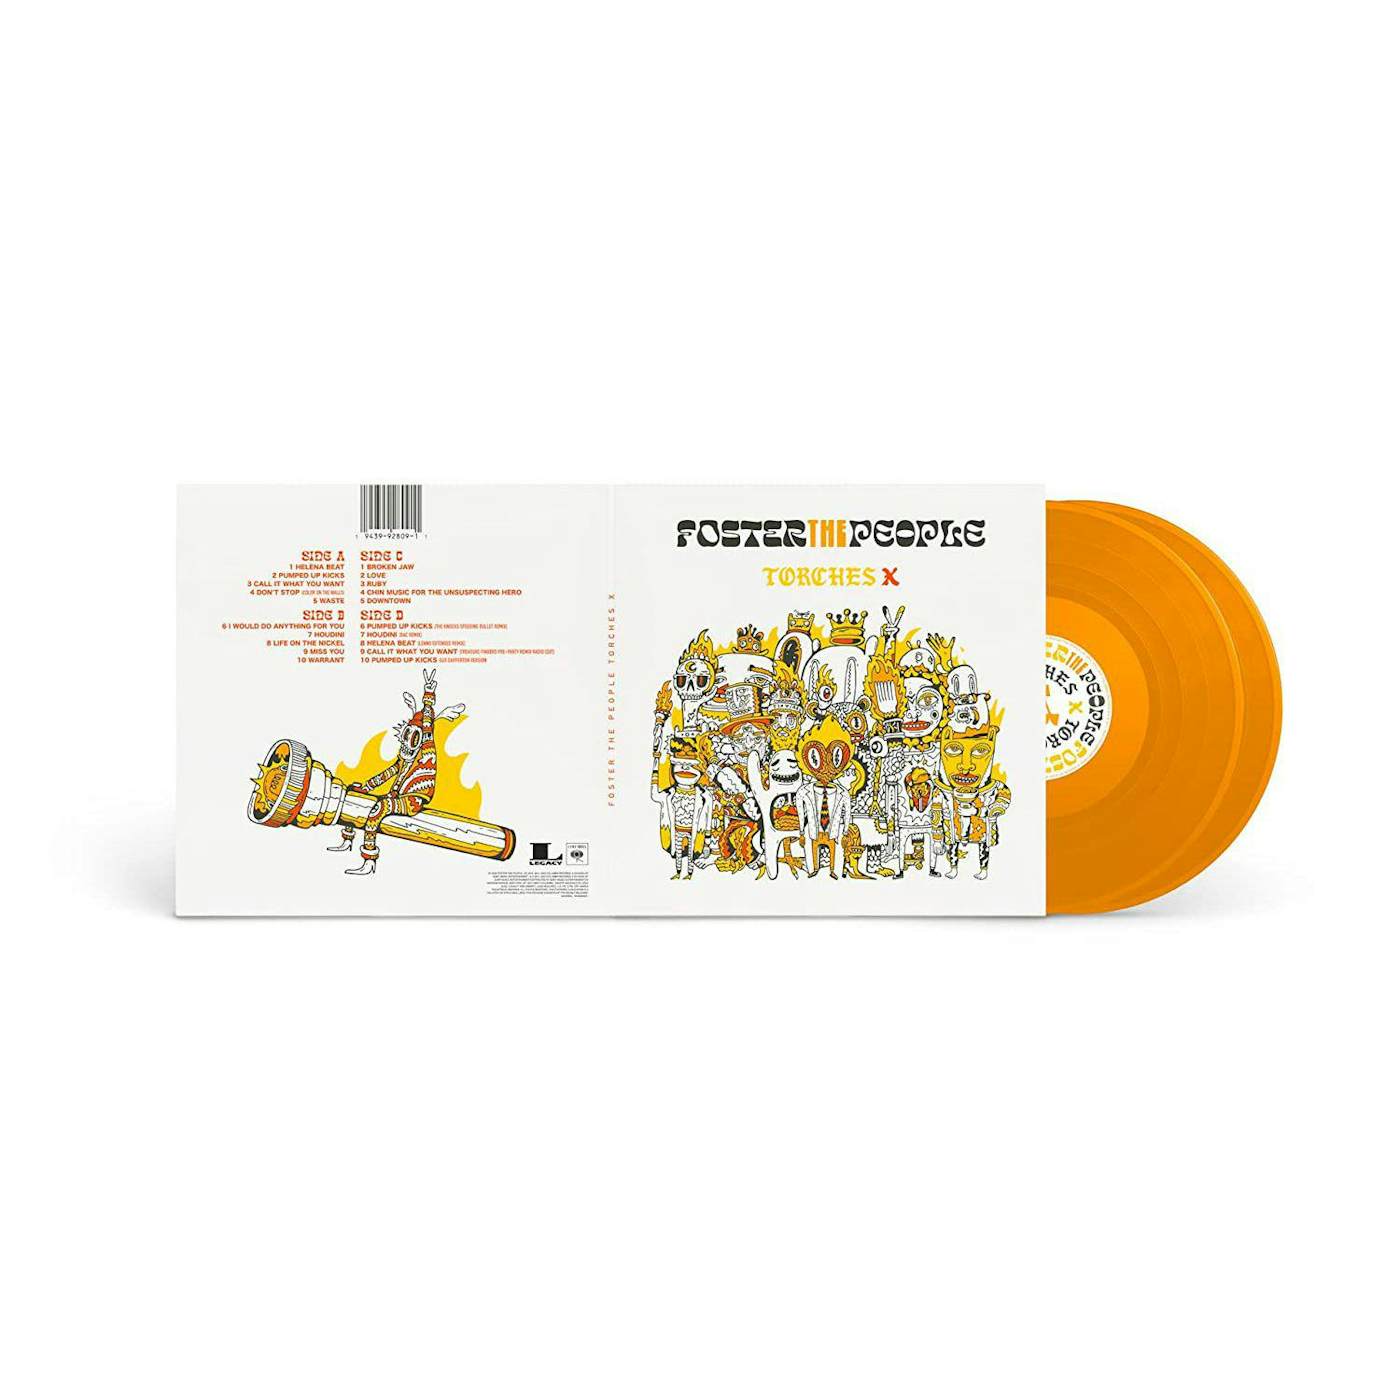 Foster The People Torches X (2LP/Orange/Deluxe Edition) Vinyl Record